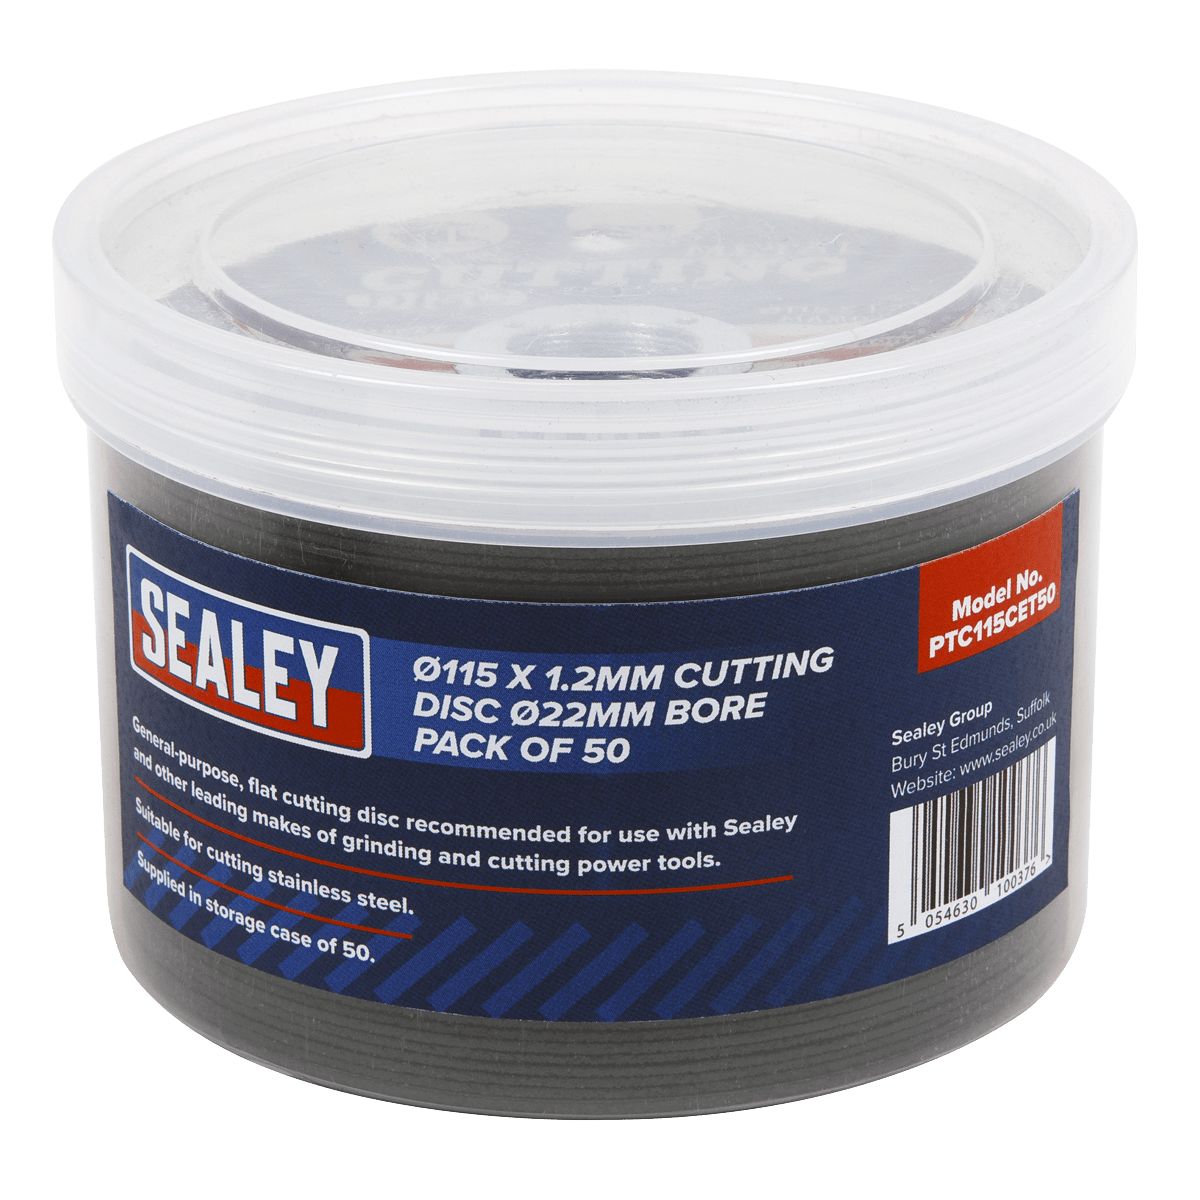 Cutting Disc Ø115 x 1.2mm Ø22mm Bore - Pack of 50 | General-purpose, flat cutting disc recommended for use with Sealey and other leading makes of grinding and cutting power tools. | toolforce.ie